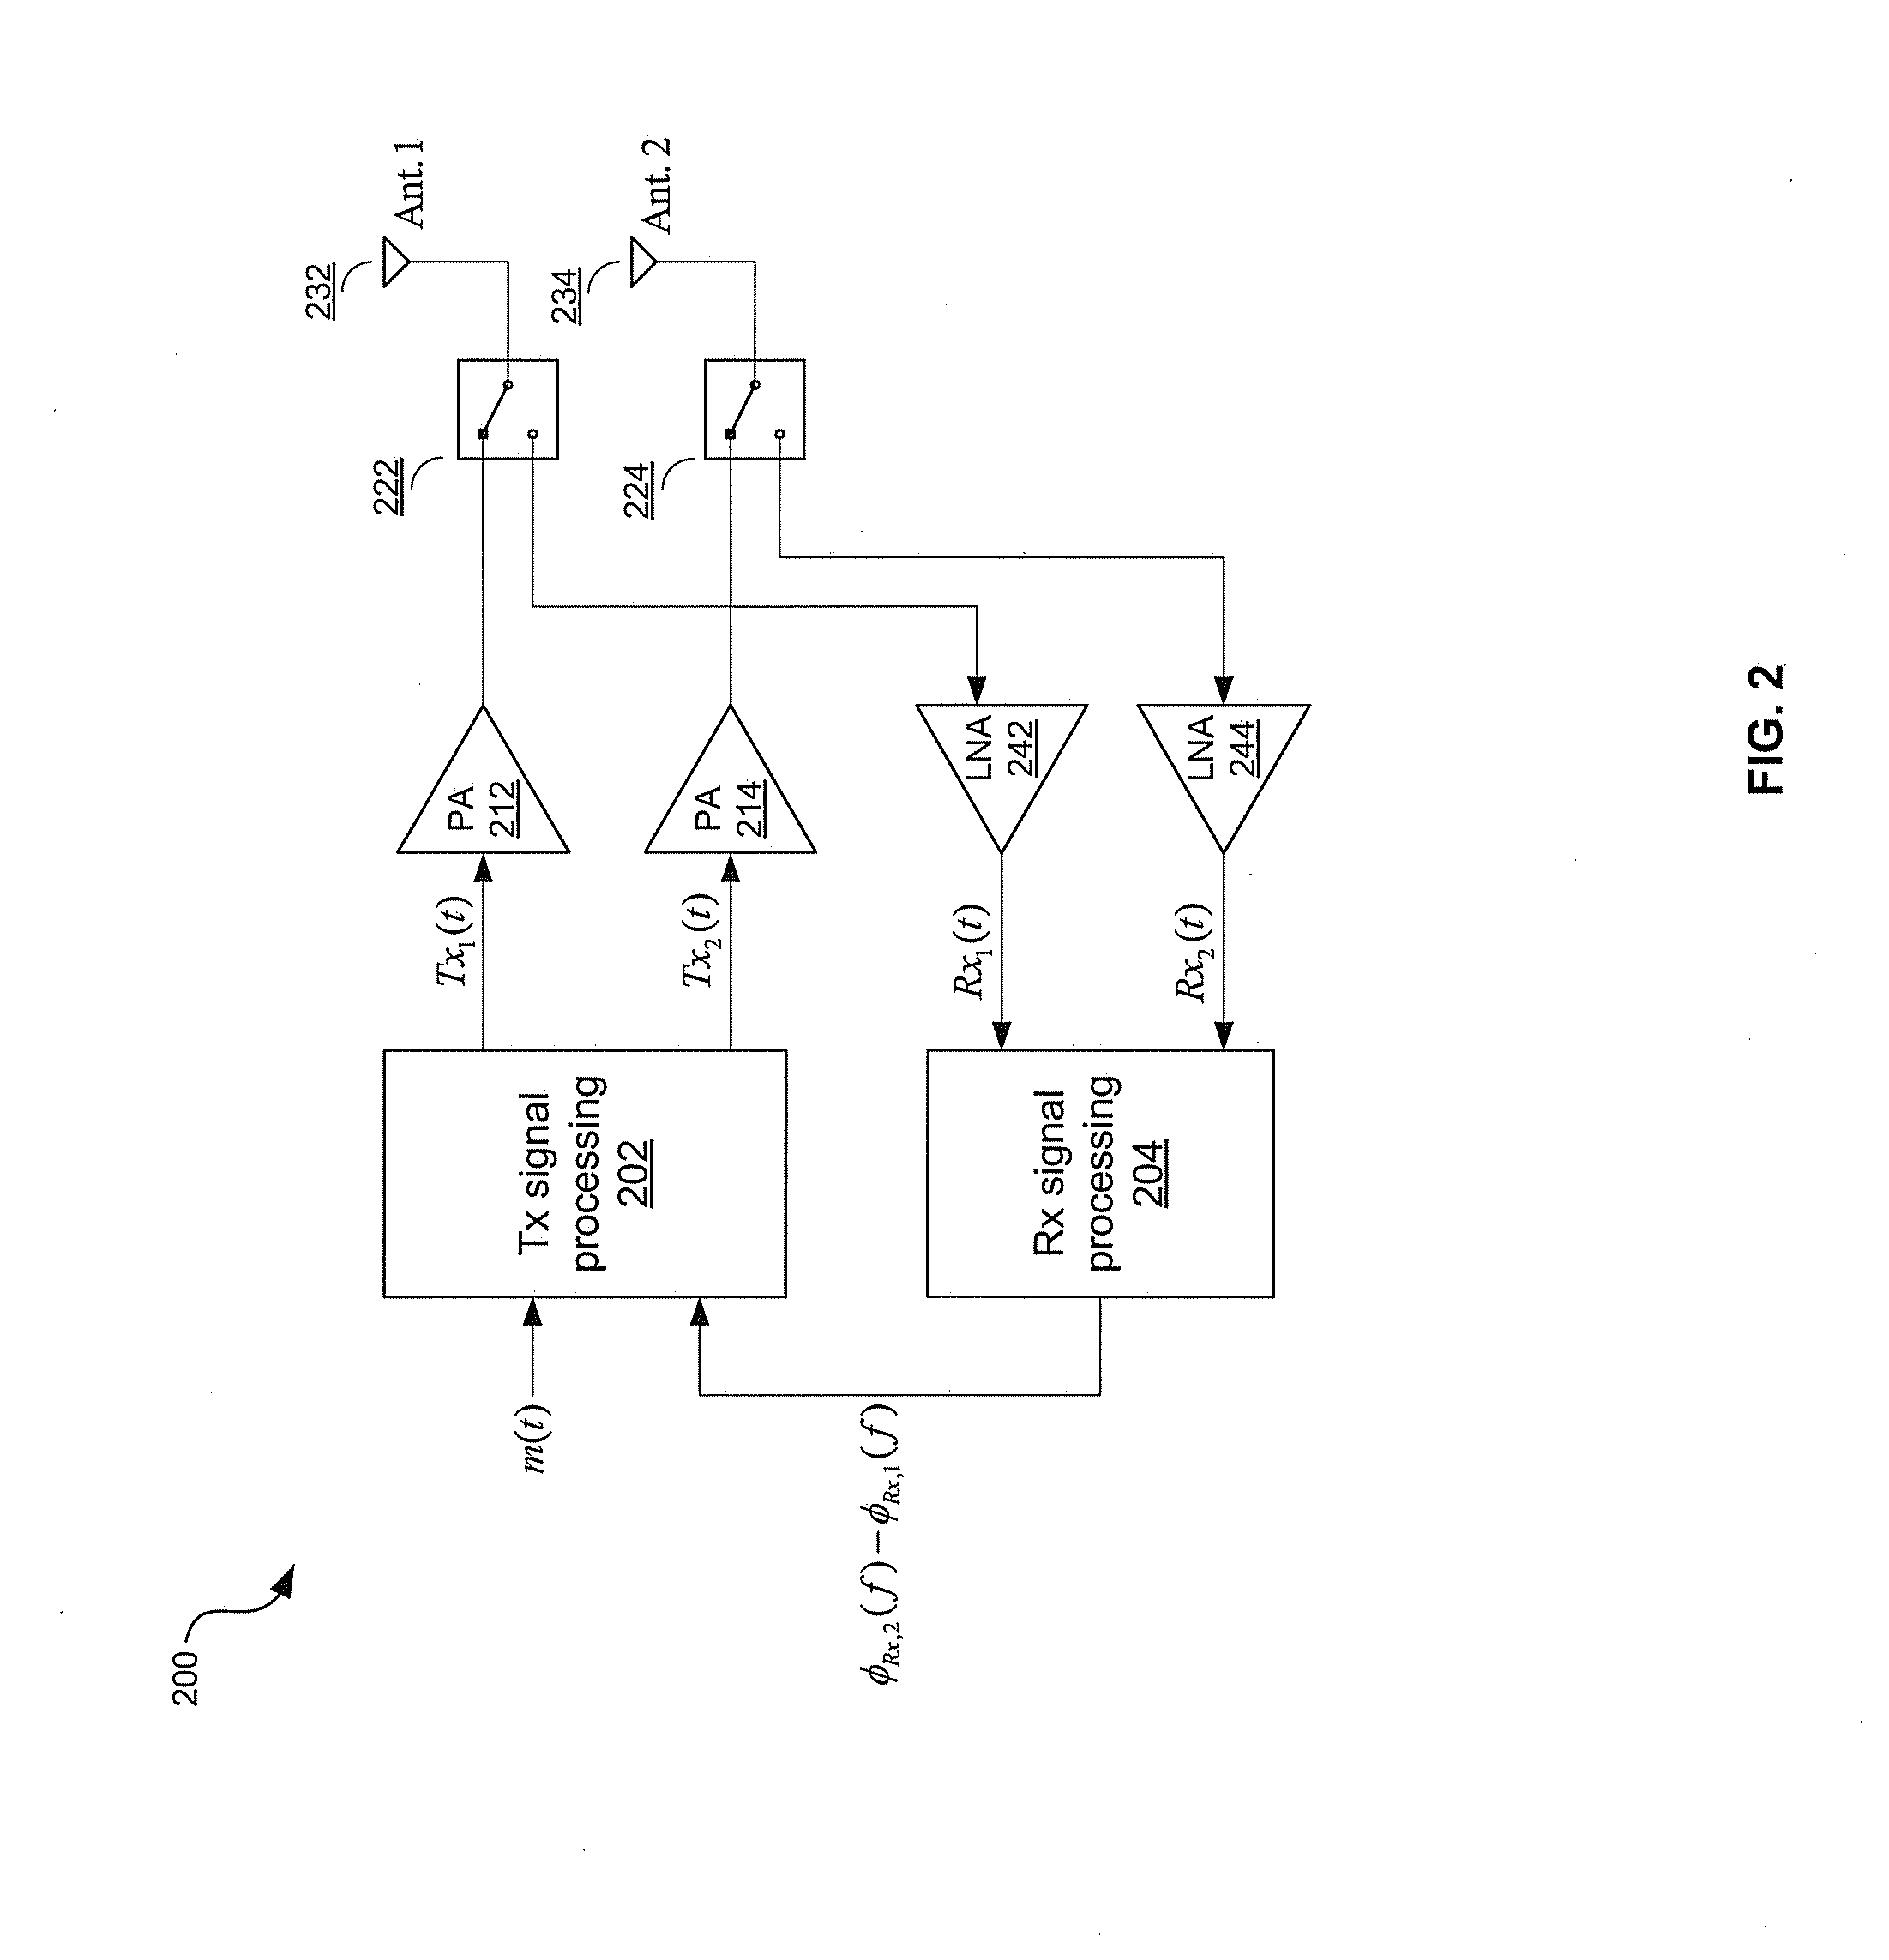 Method and system of beamforming a broadband signal through a multiport network